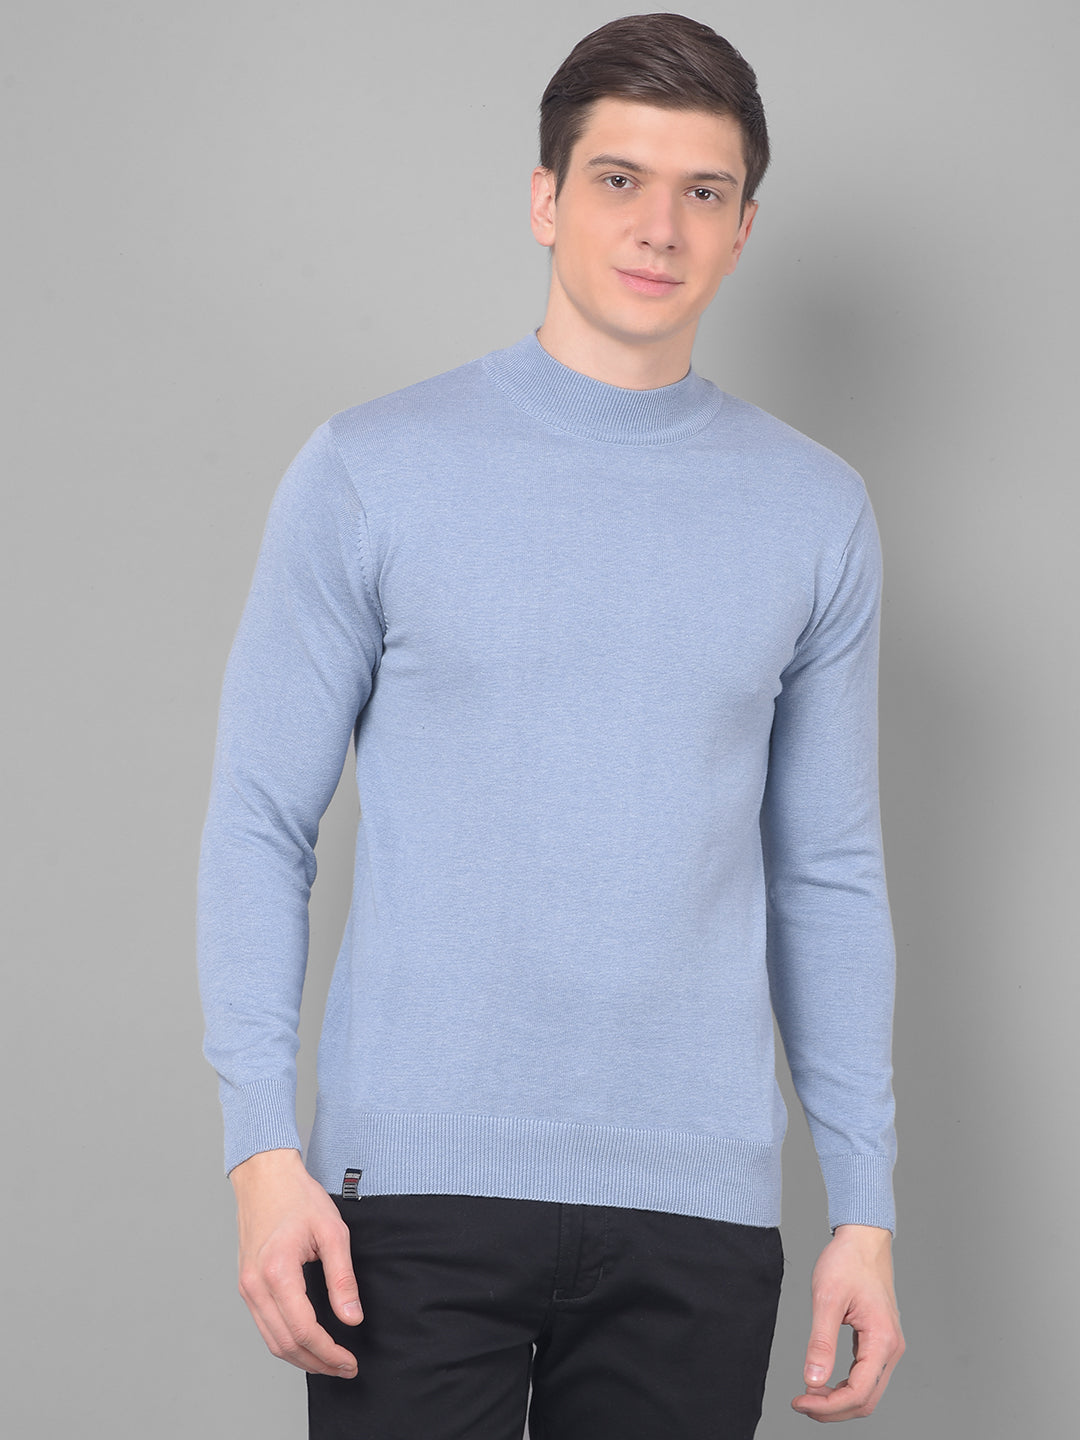 cobb solid sky blue high neck sweater